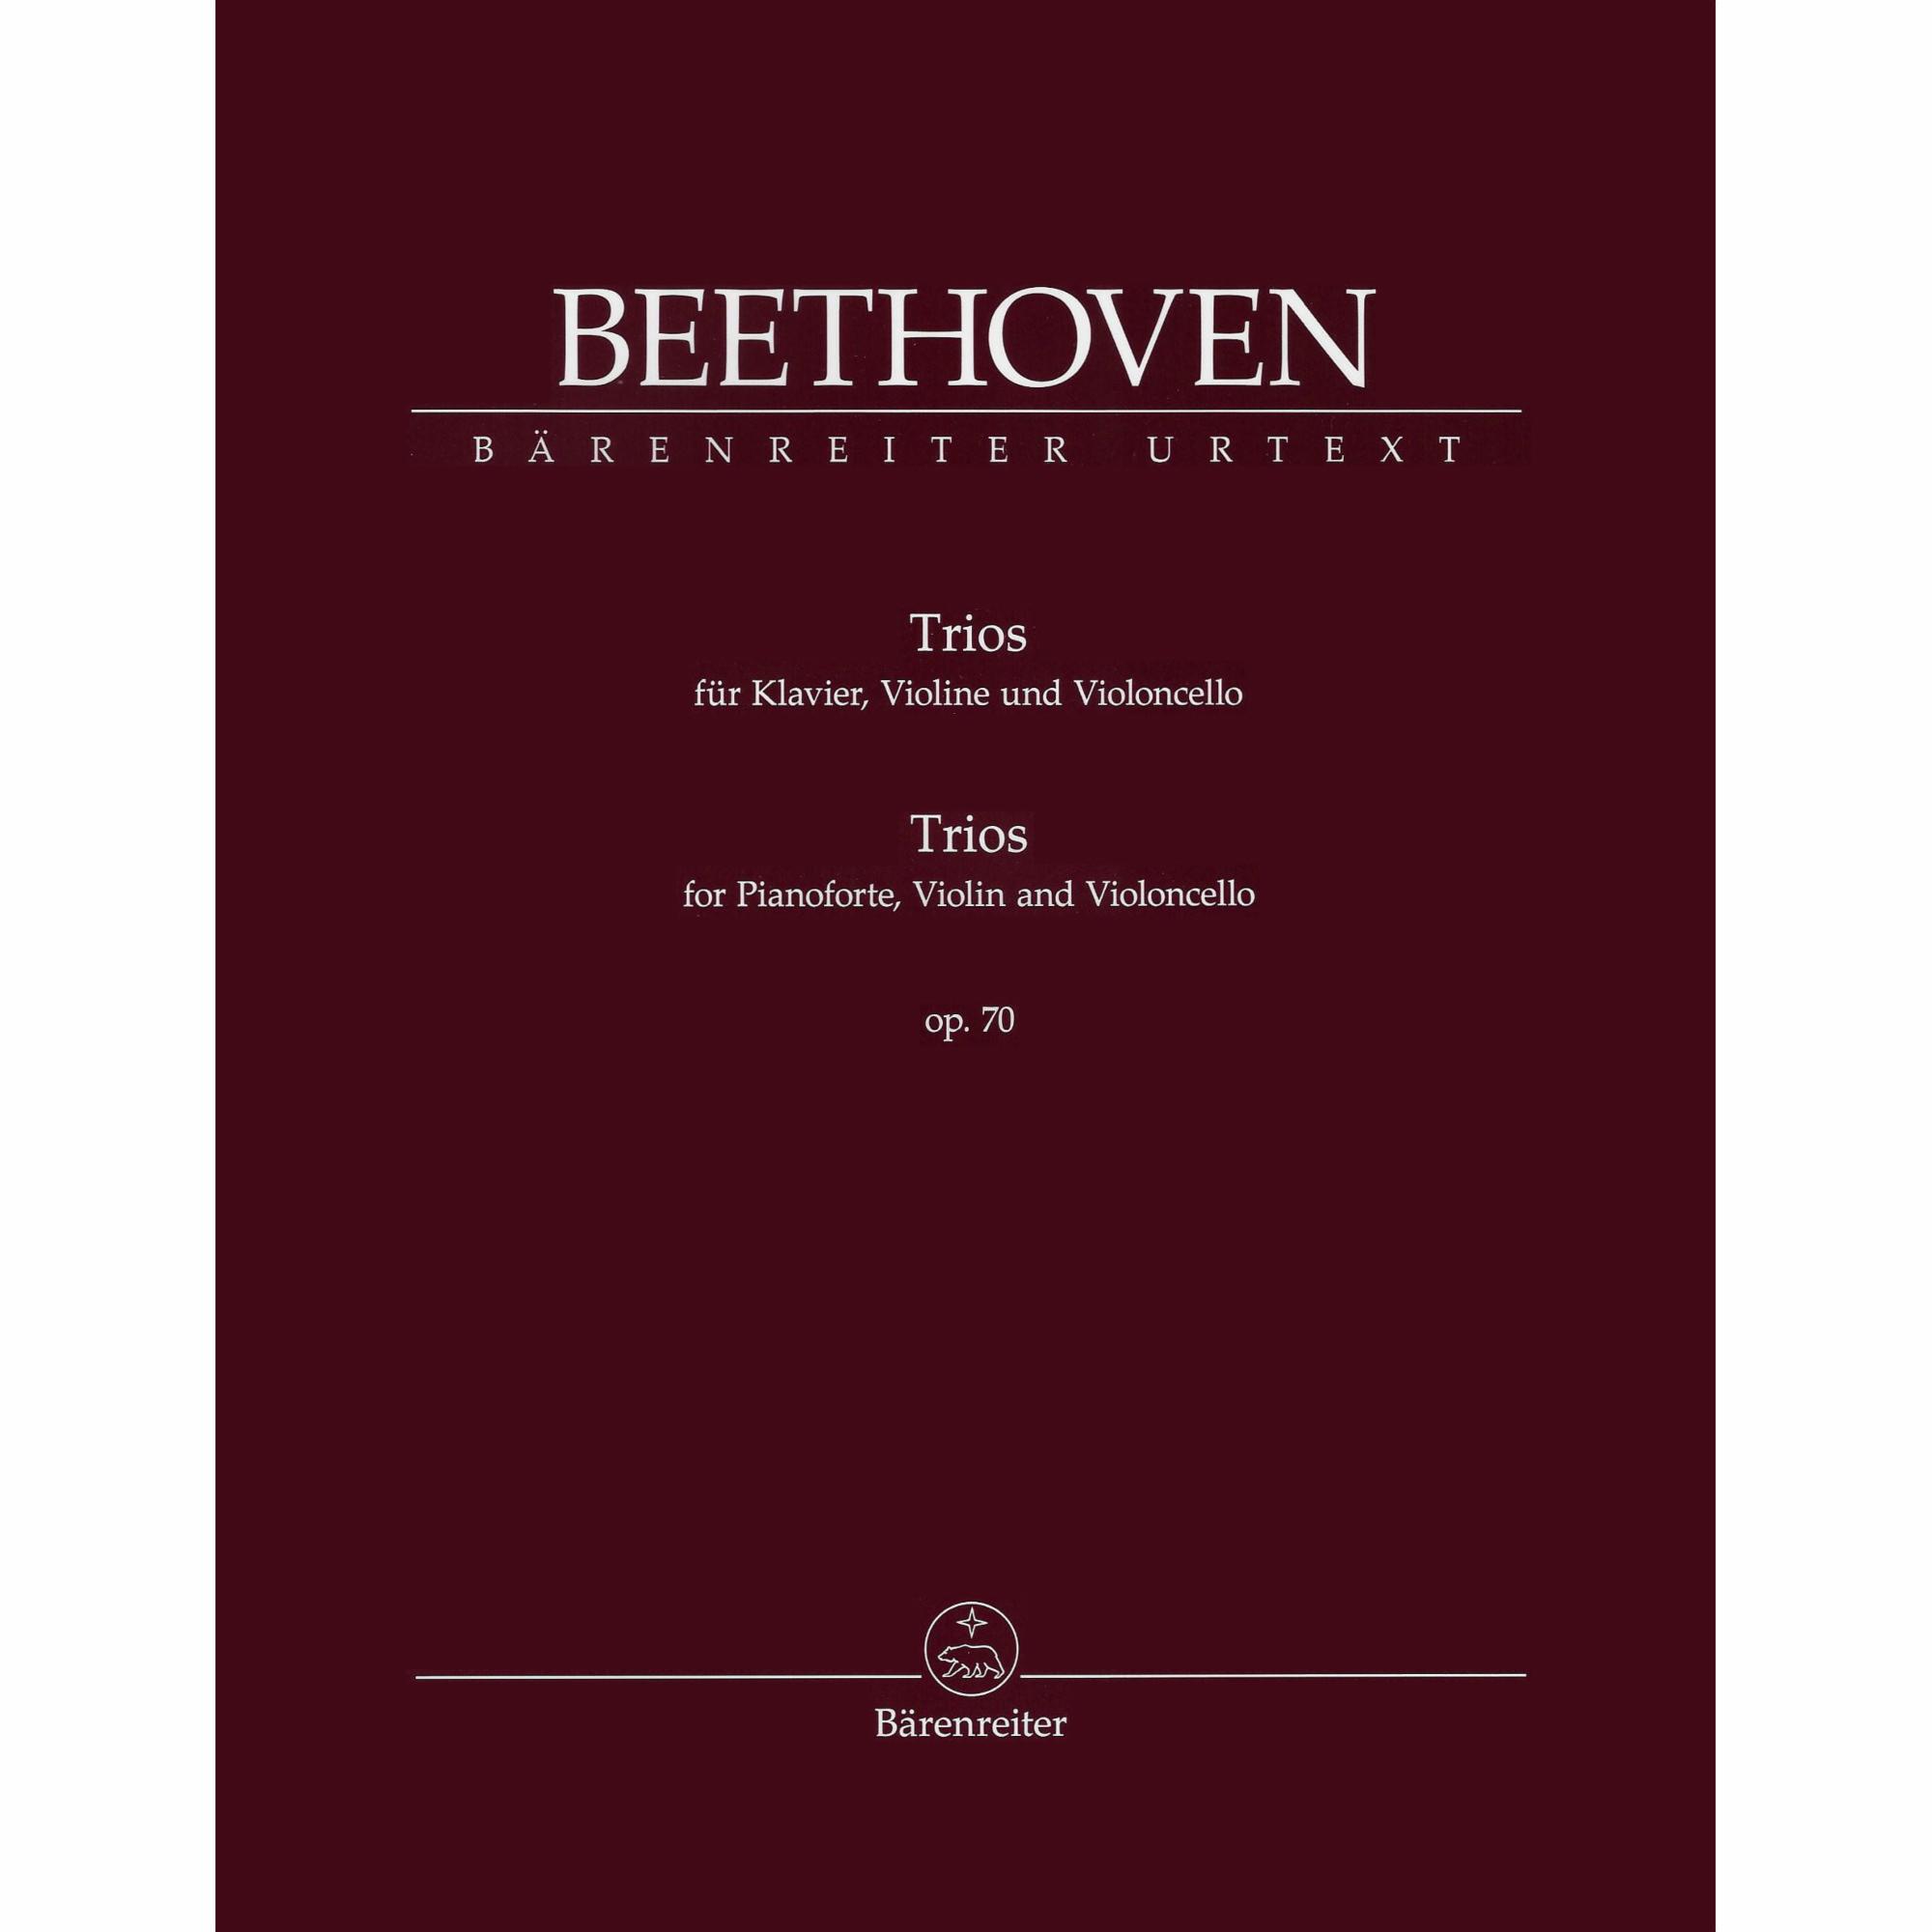 Beethoven -- Trios, Op. 70 for Violin, Cello and Piano